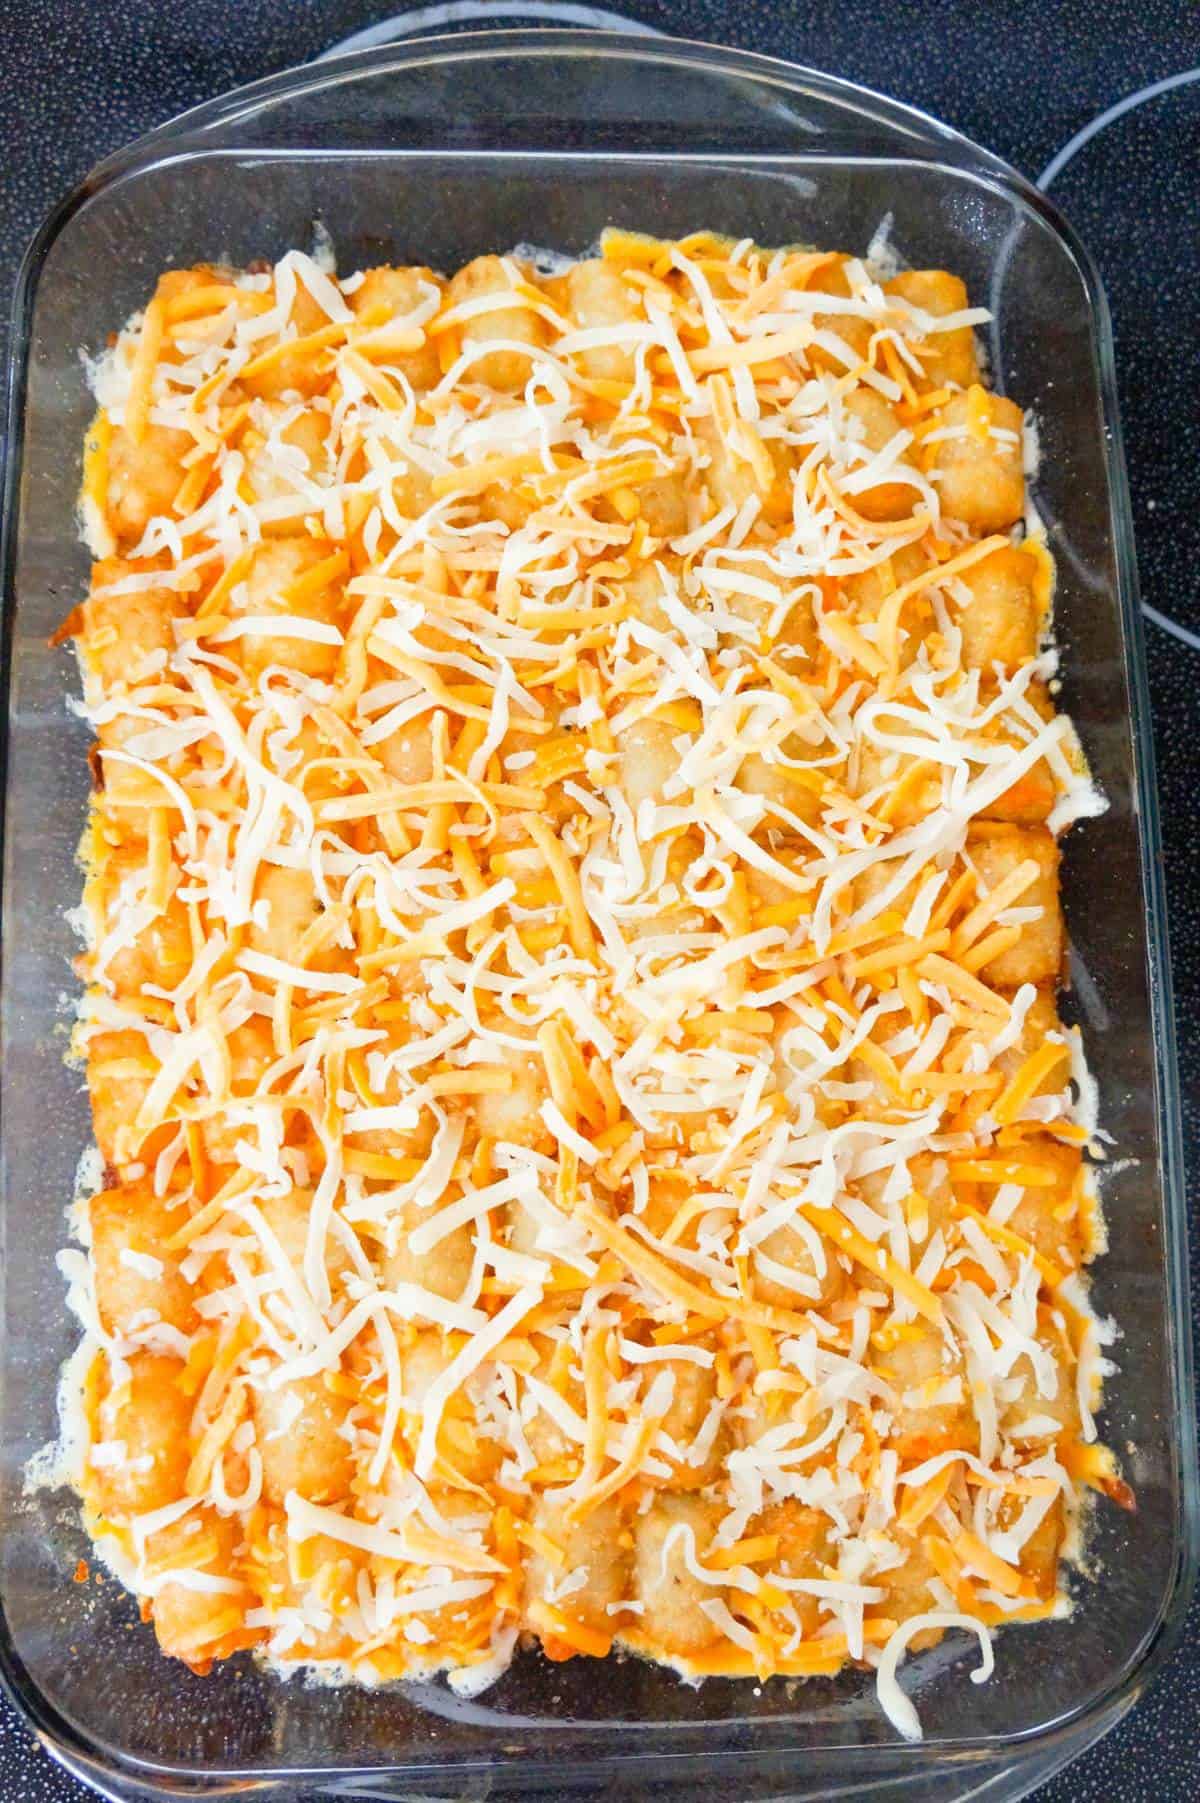 shredded cheese on top of tater tot casserole in a baking dish